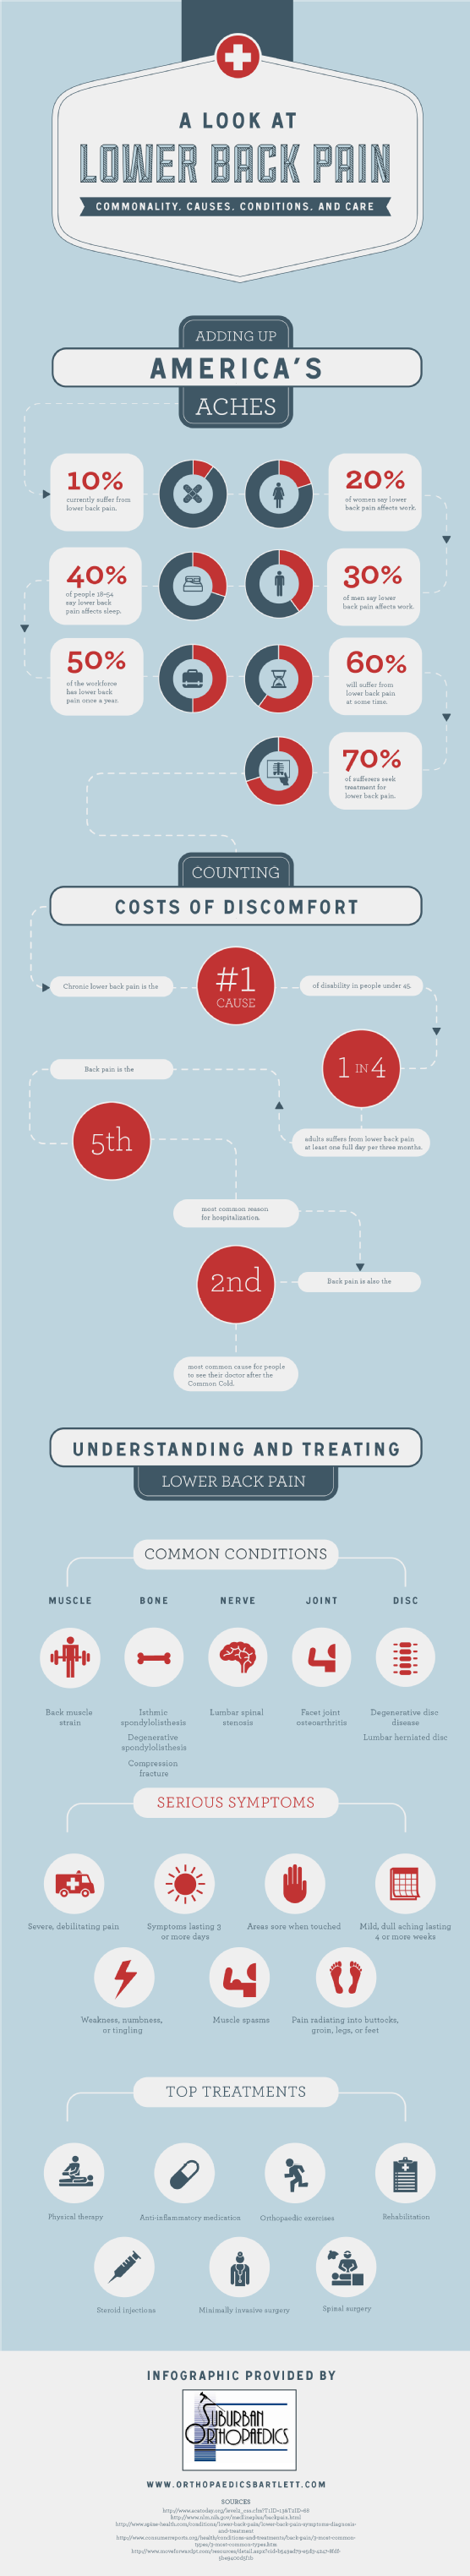 6. A look at the lower back pain